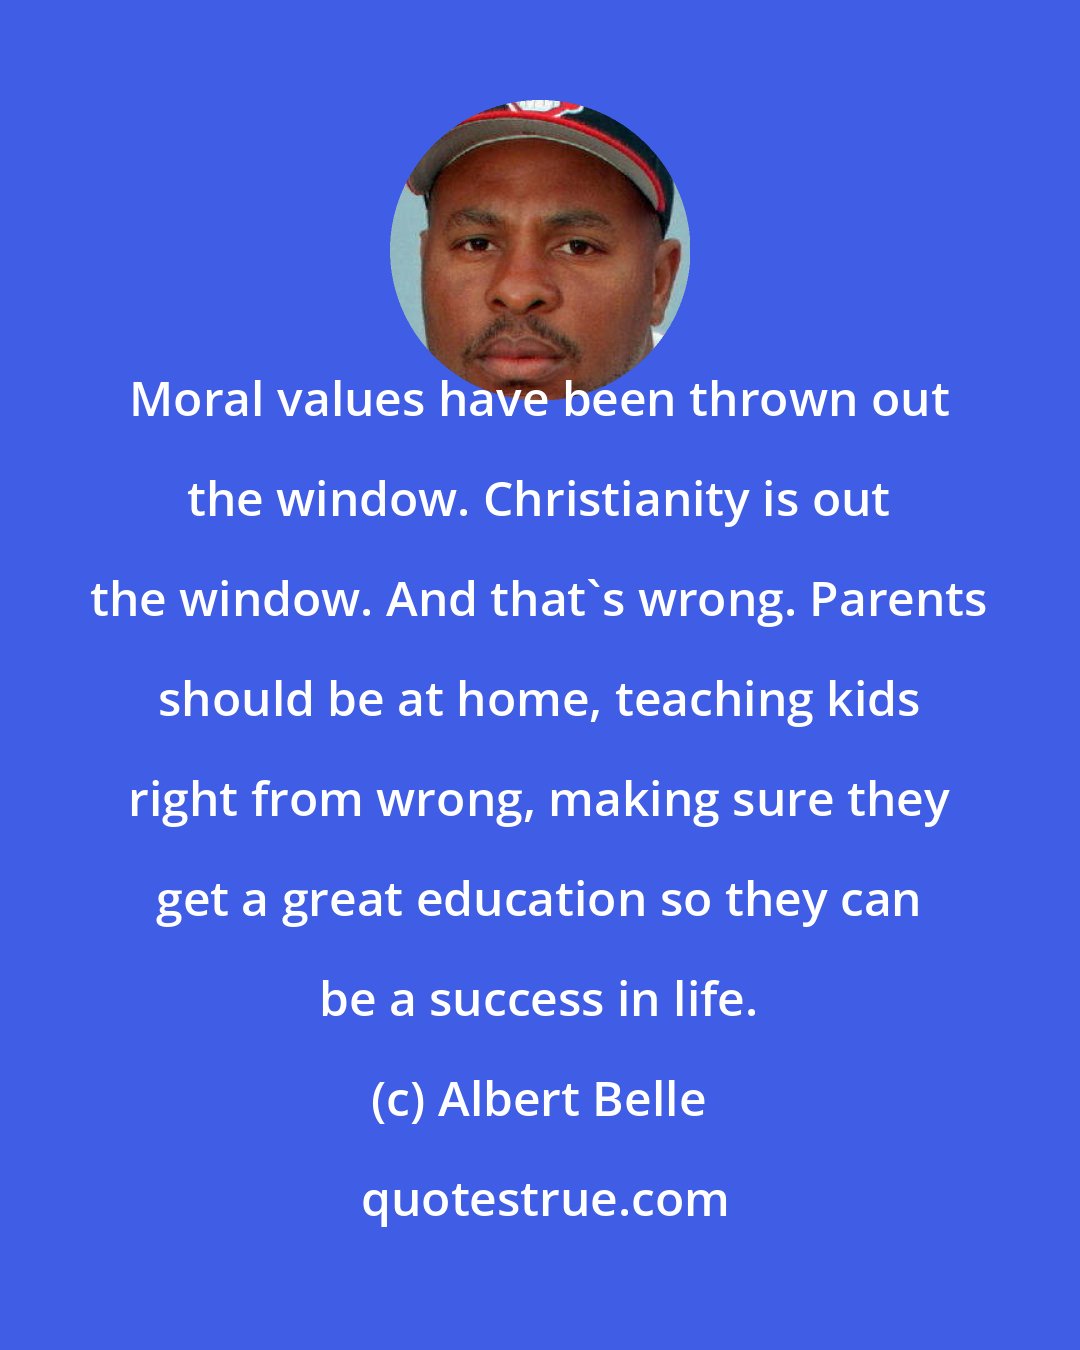 Albert Belle: Moral values have been thrown out the window. Christianity is out the window. And that's wrong. Parents should be at home, teaching kids right from wrong, making sure they get a great education so they can be a success in life.